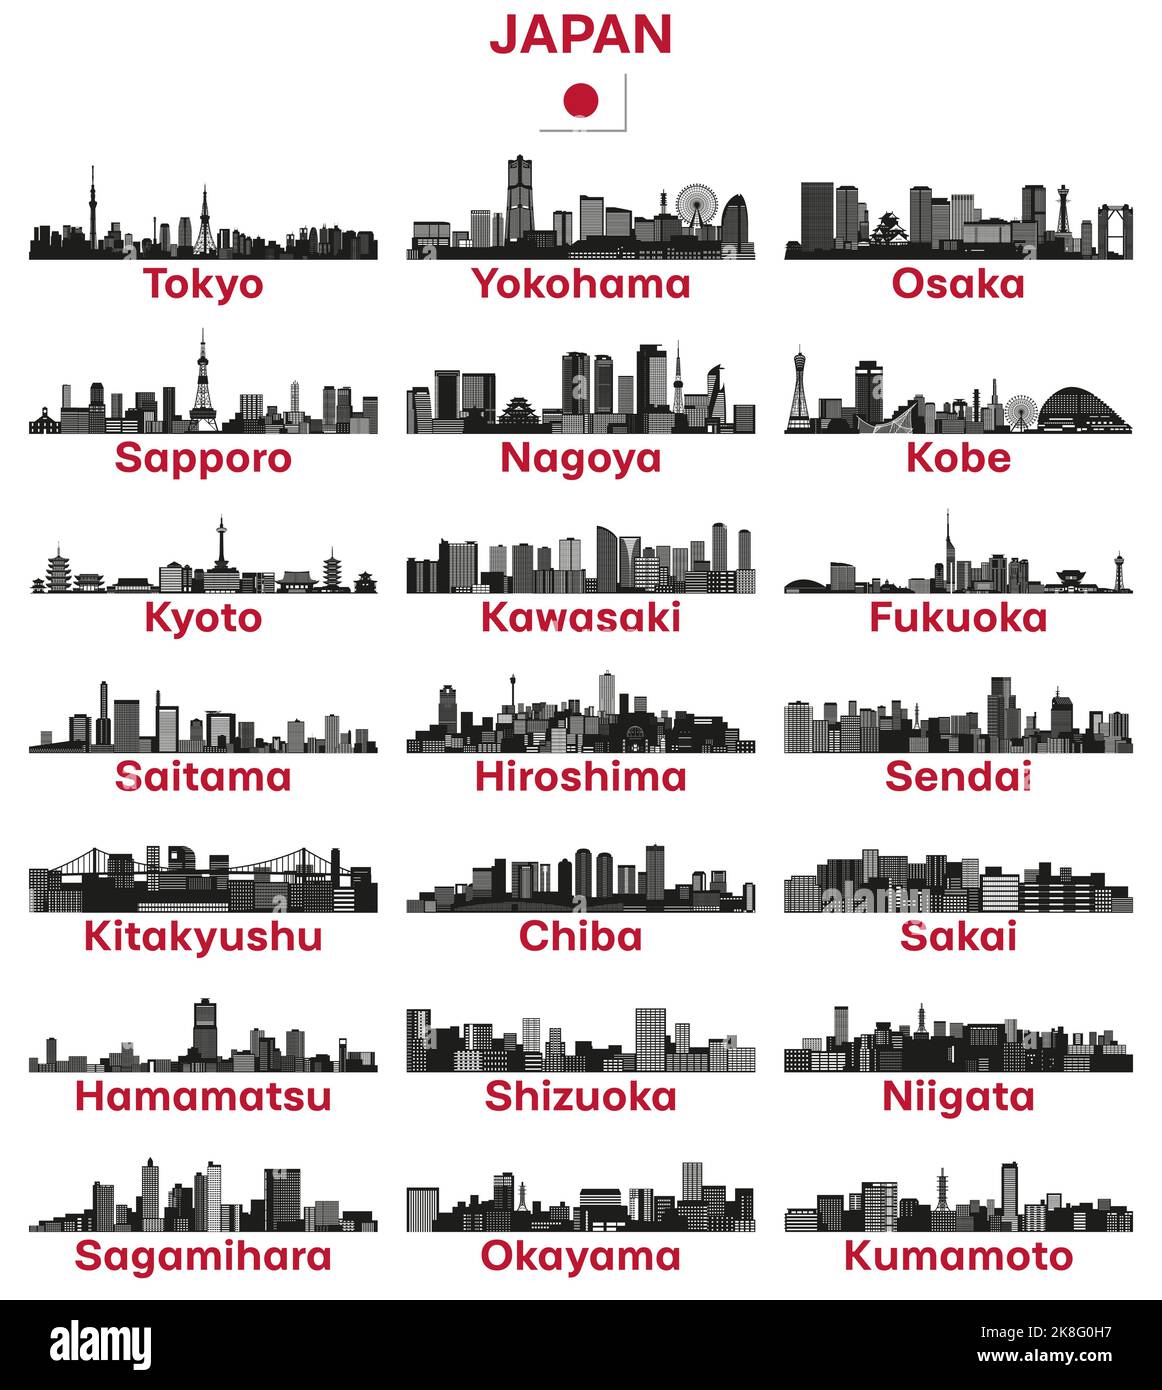 Japan cities skylines silhouettes vector set Stock Vector